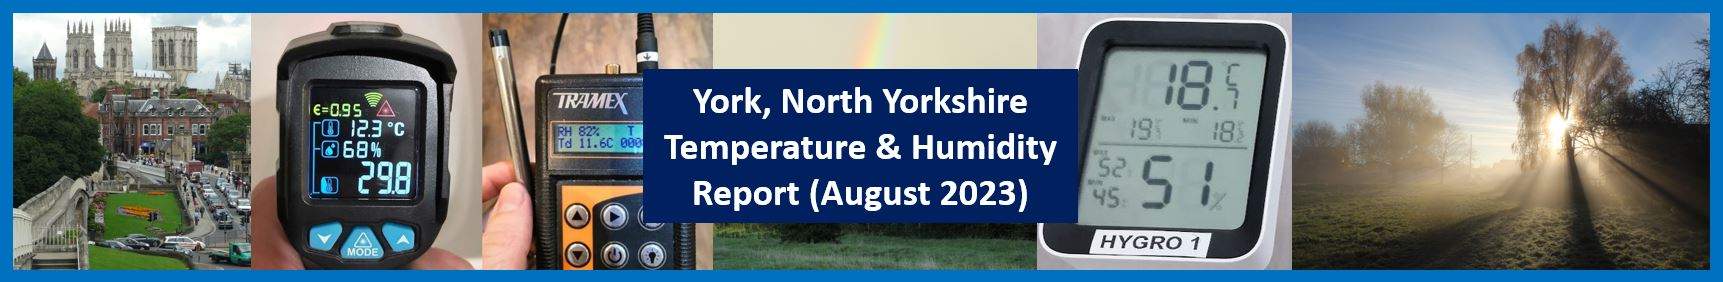 Temperature and Humidity in York - August 2023 Report